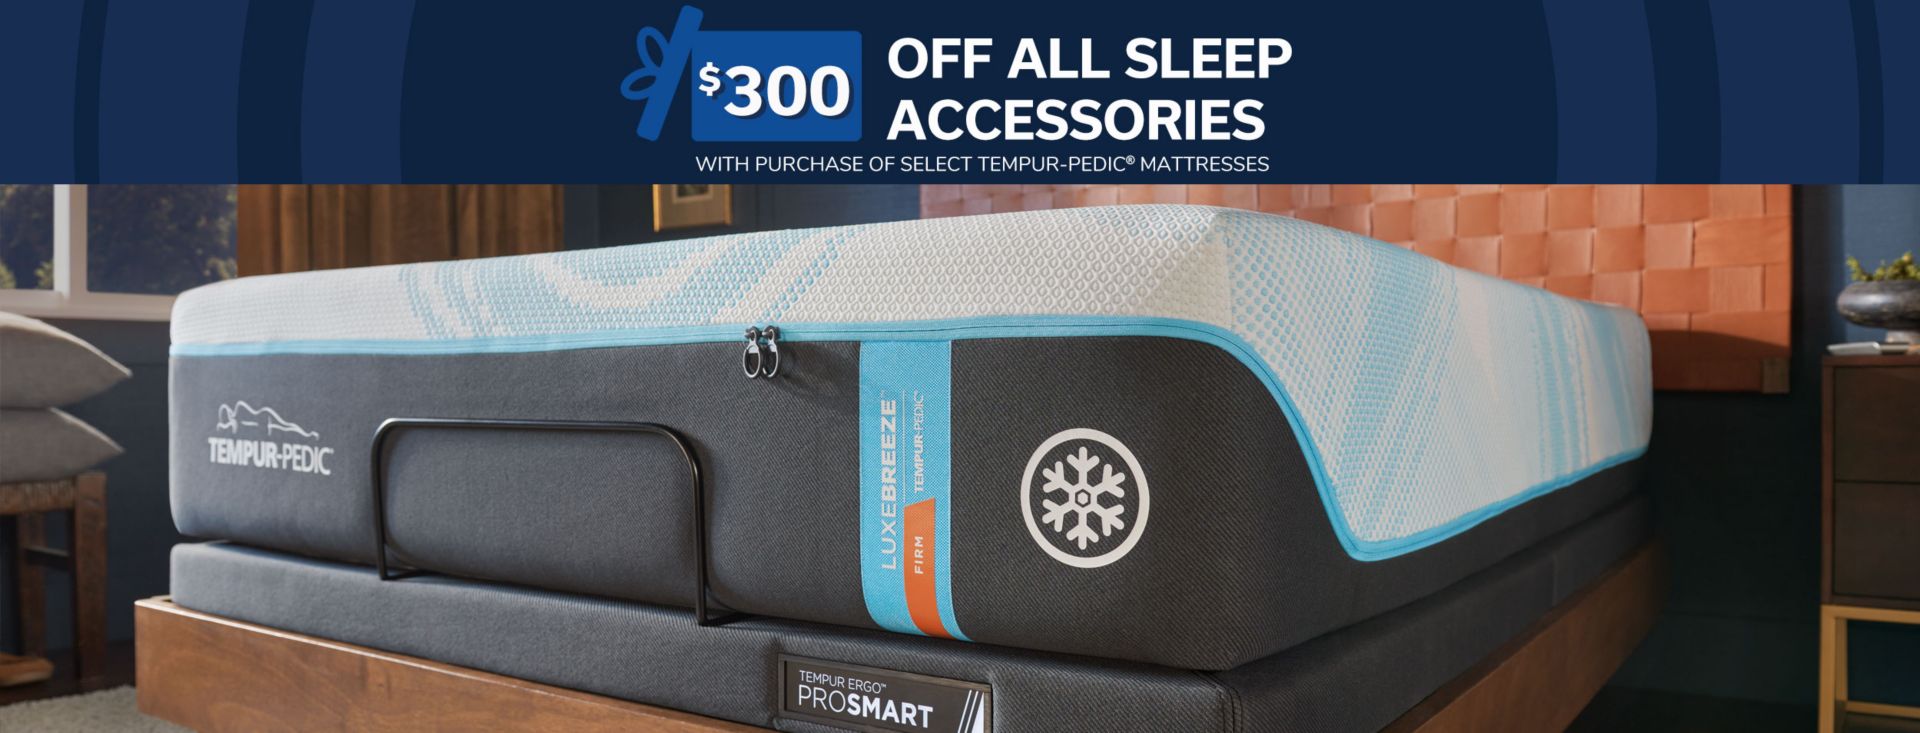 $300 Off All Sleep Accessories. With Purchase of Select Tempur-Pedic Mattresses. 